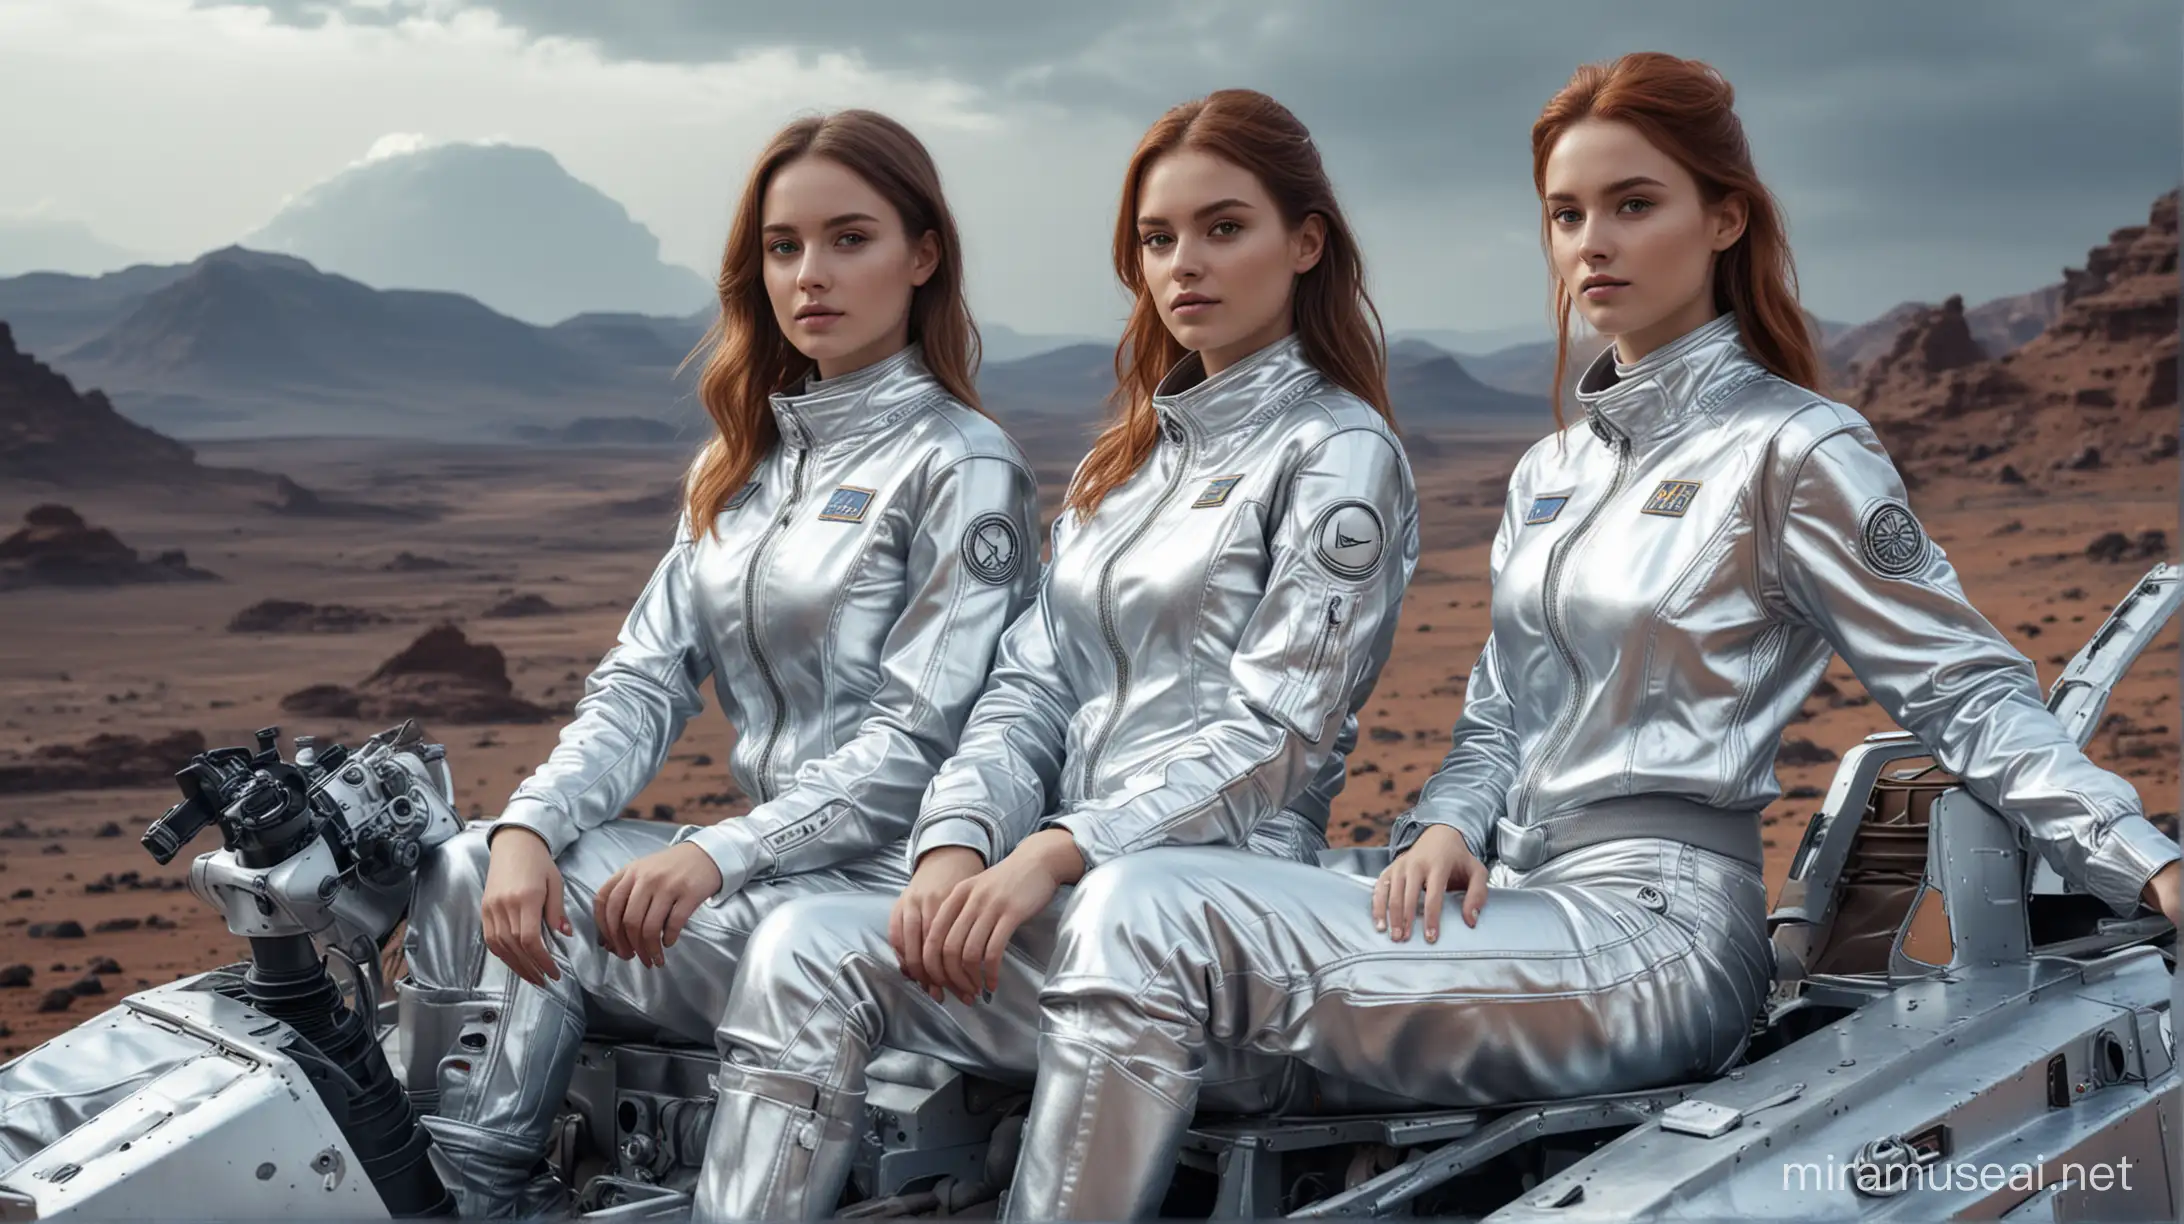 Three Young Women in Silver Metallic Outfits Sitting on SciFi Rover on Far Planet Surface